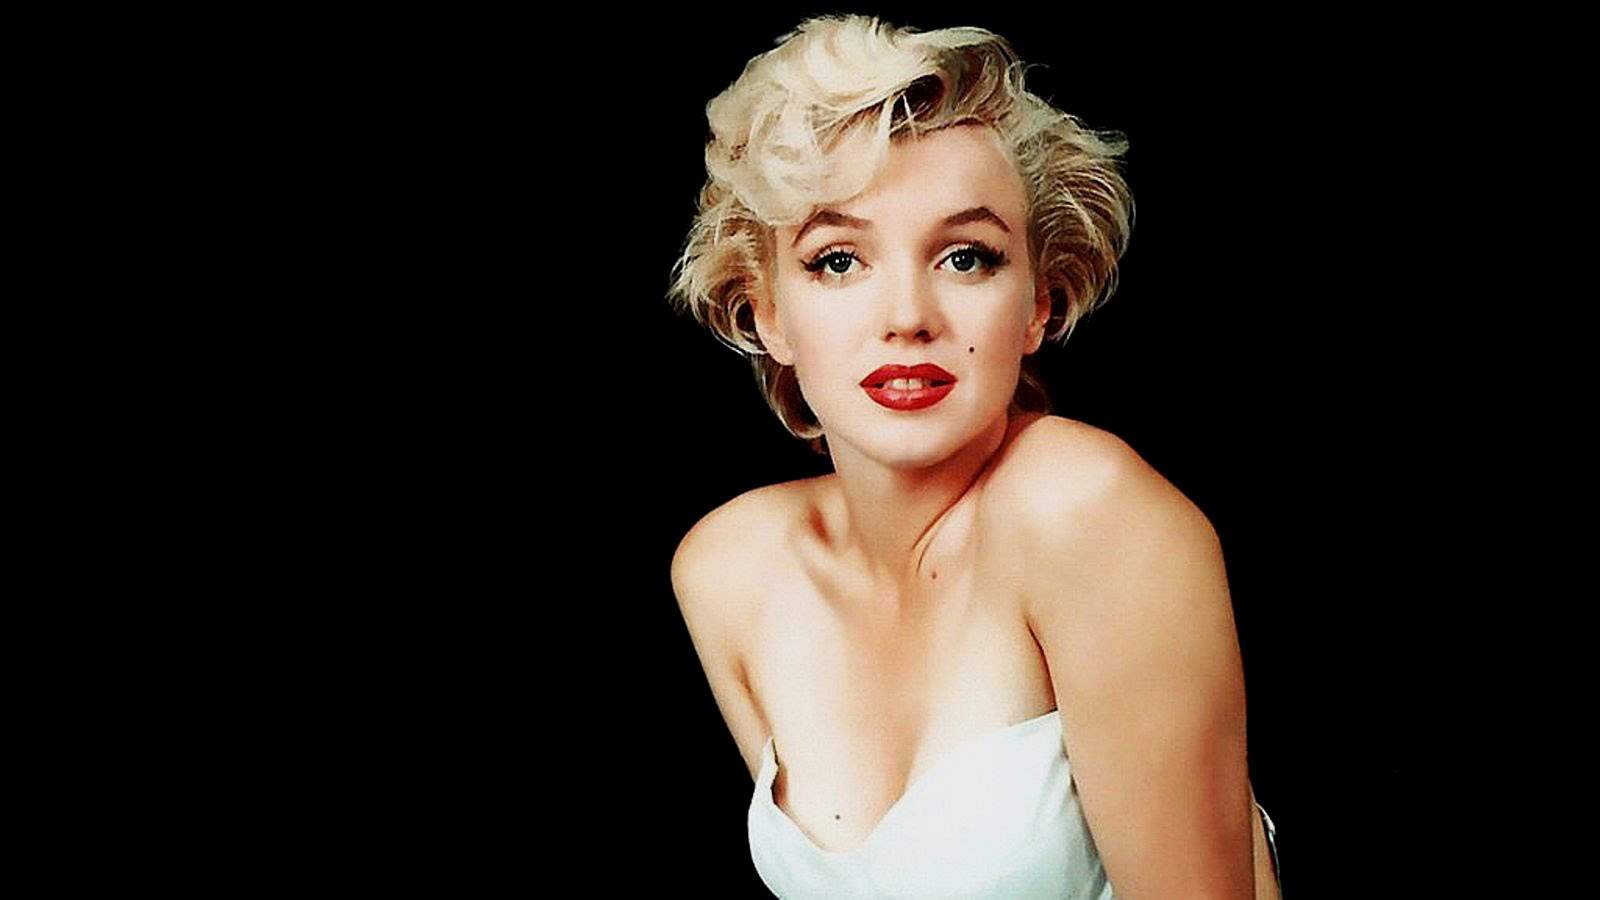 Can You Live a Day in the Life of Marilyn Monroe? 236